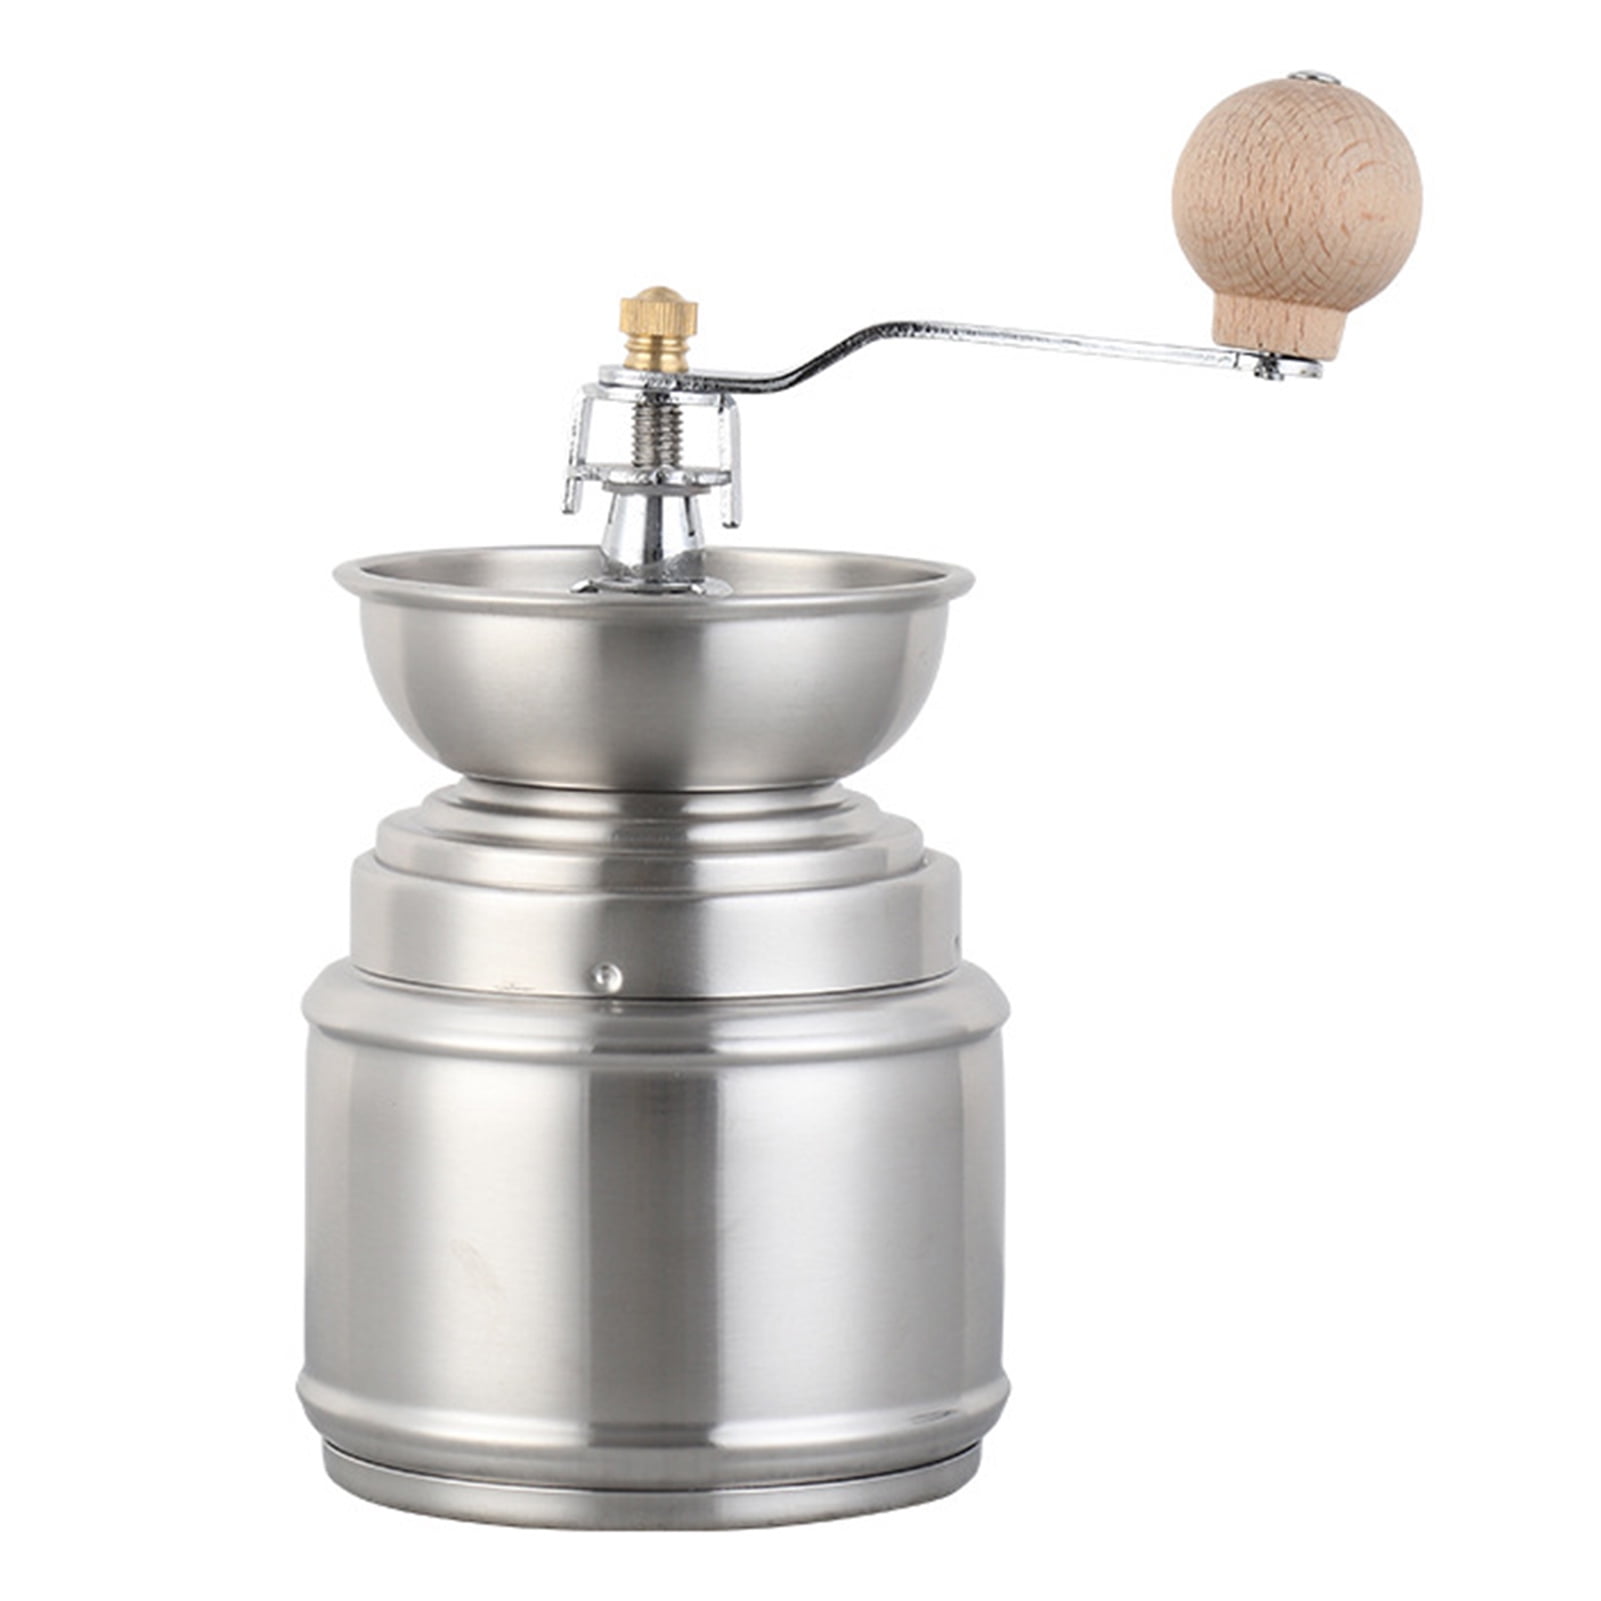 Details about   Portable Manual Coffee Grinder Stainless Steel w/ Ceramic Burr Bean Mill 